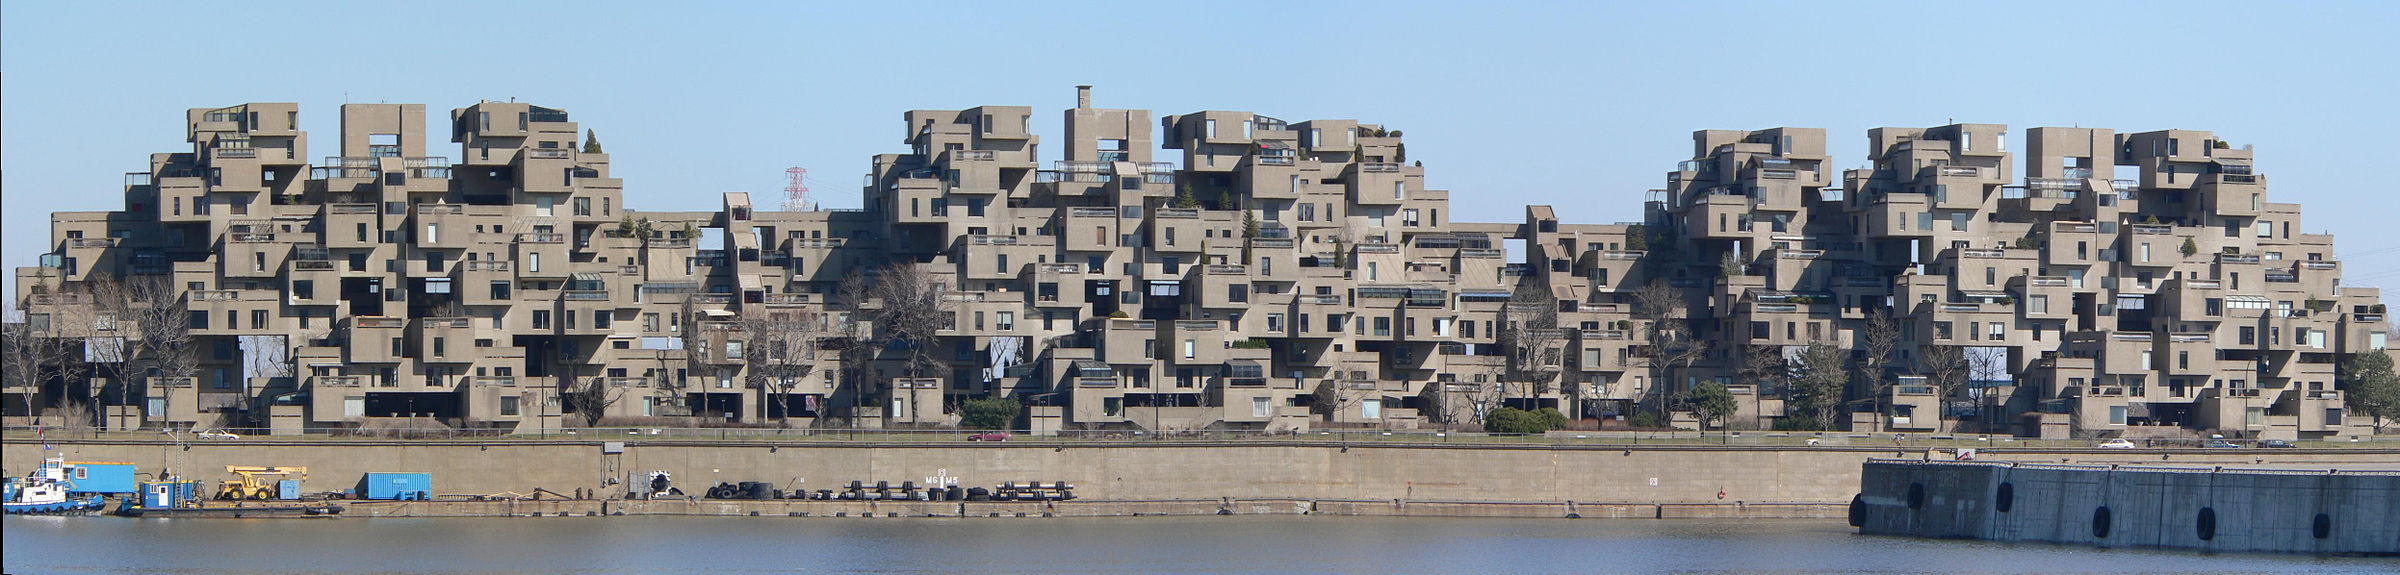 Unique building that looks like a number of blocks stacked together.